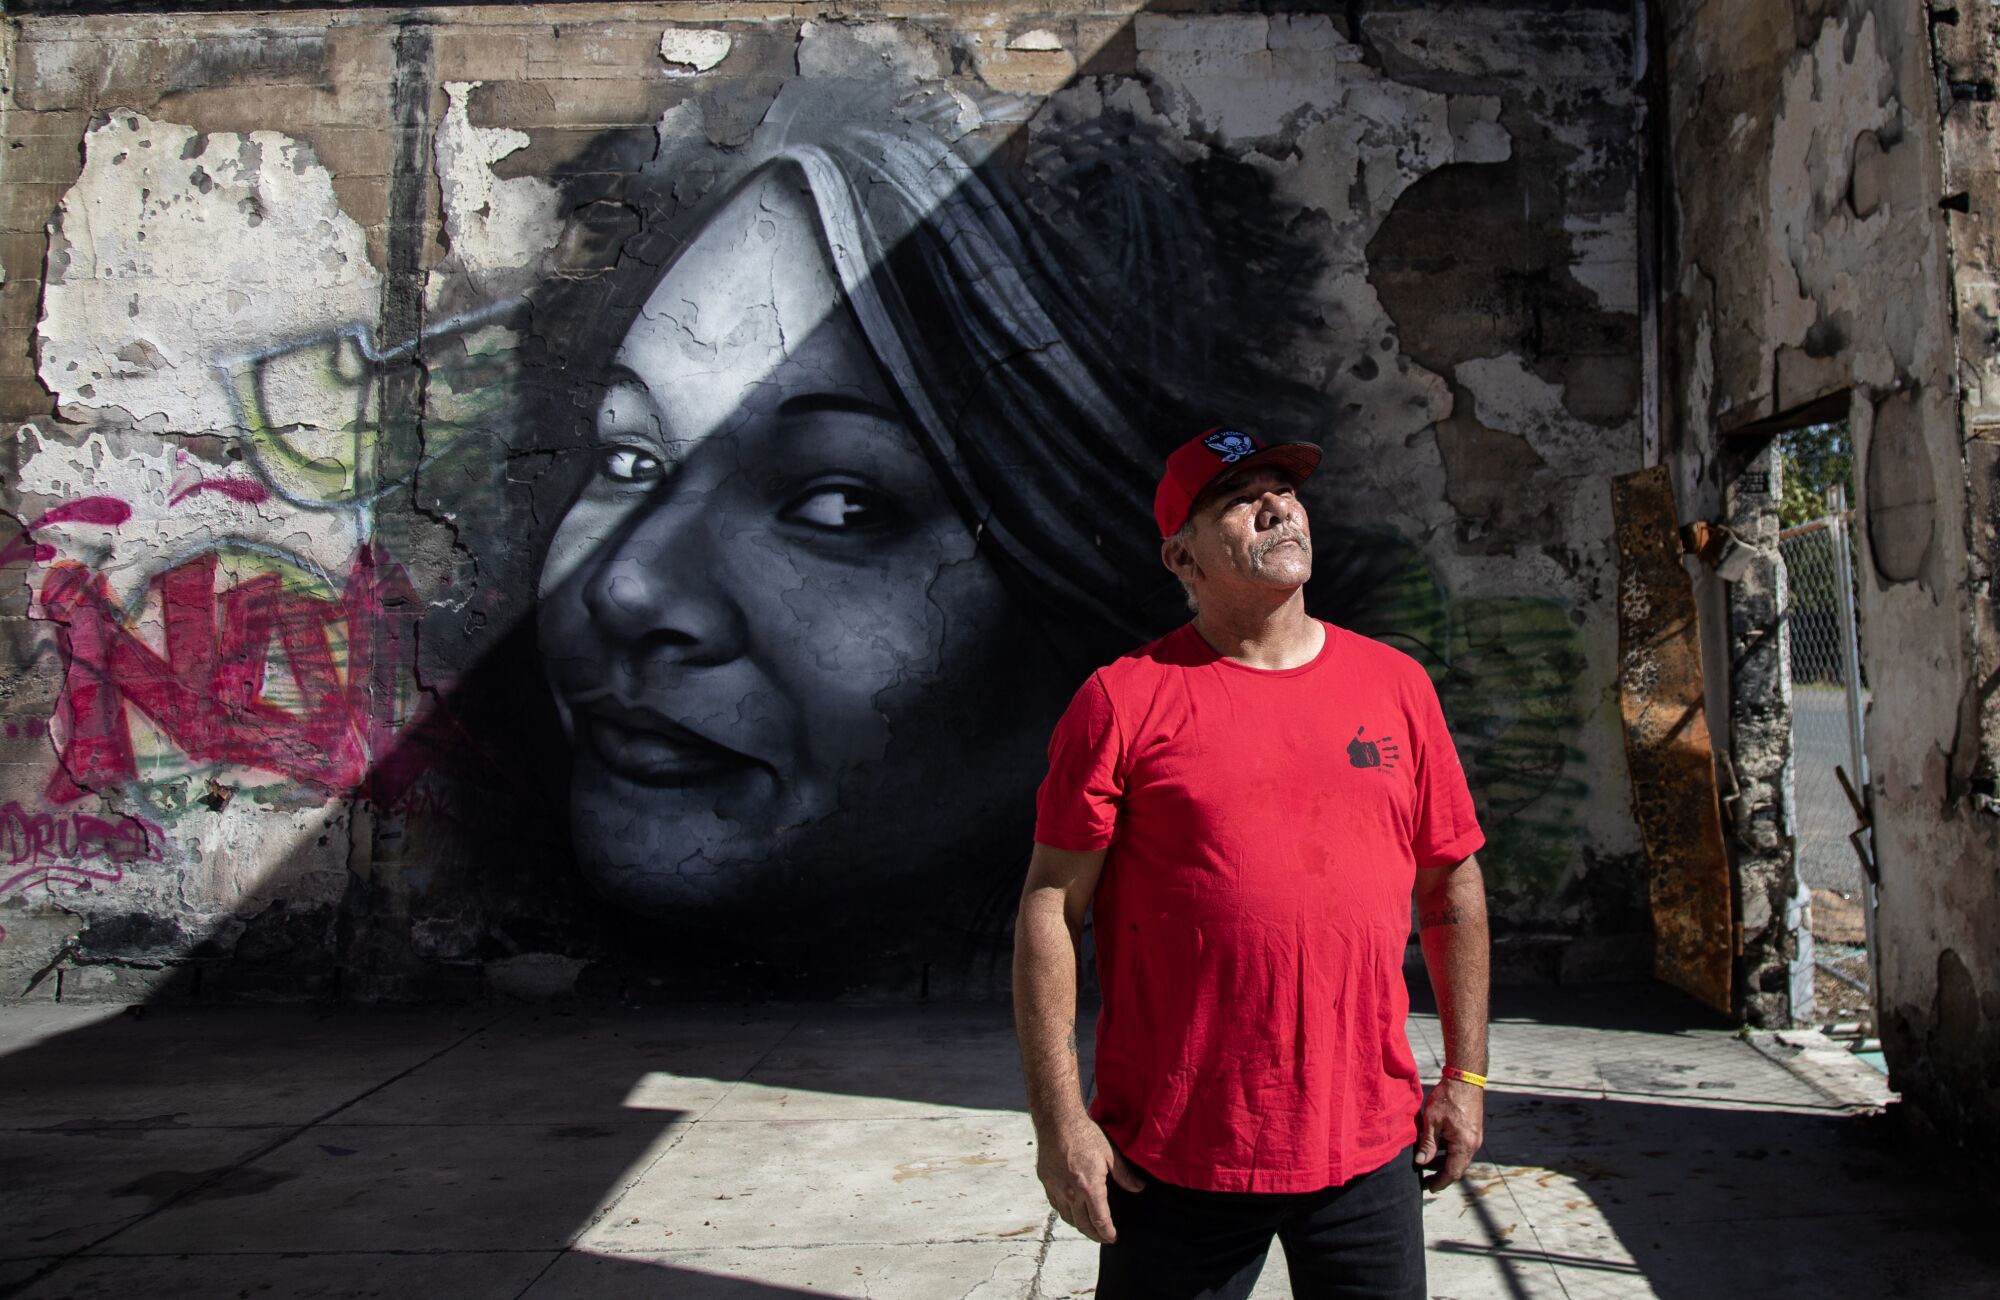 A man in a red T-shirt and cap stands in front of a mural of a woman